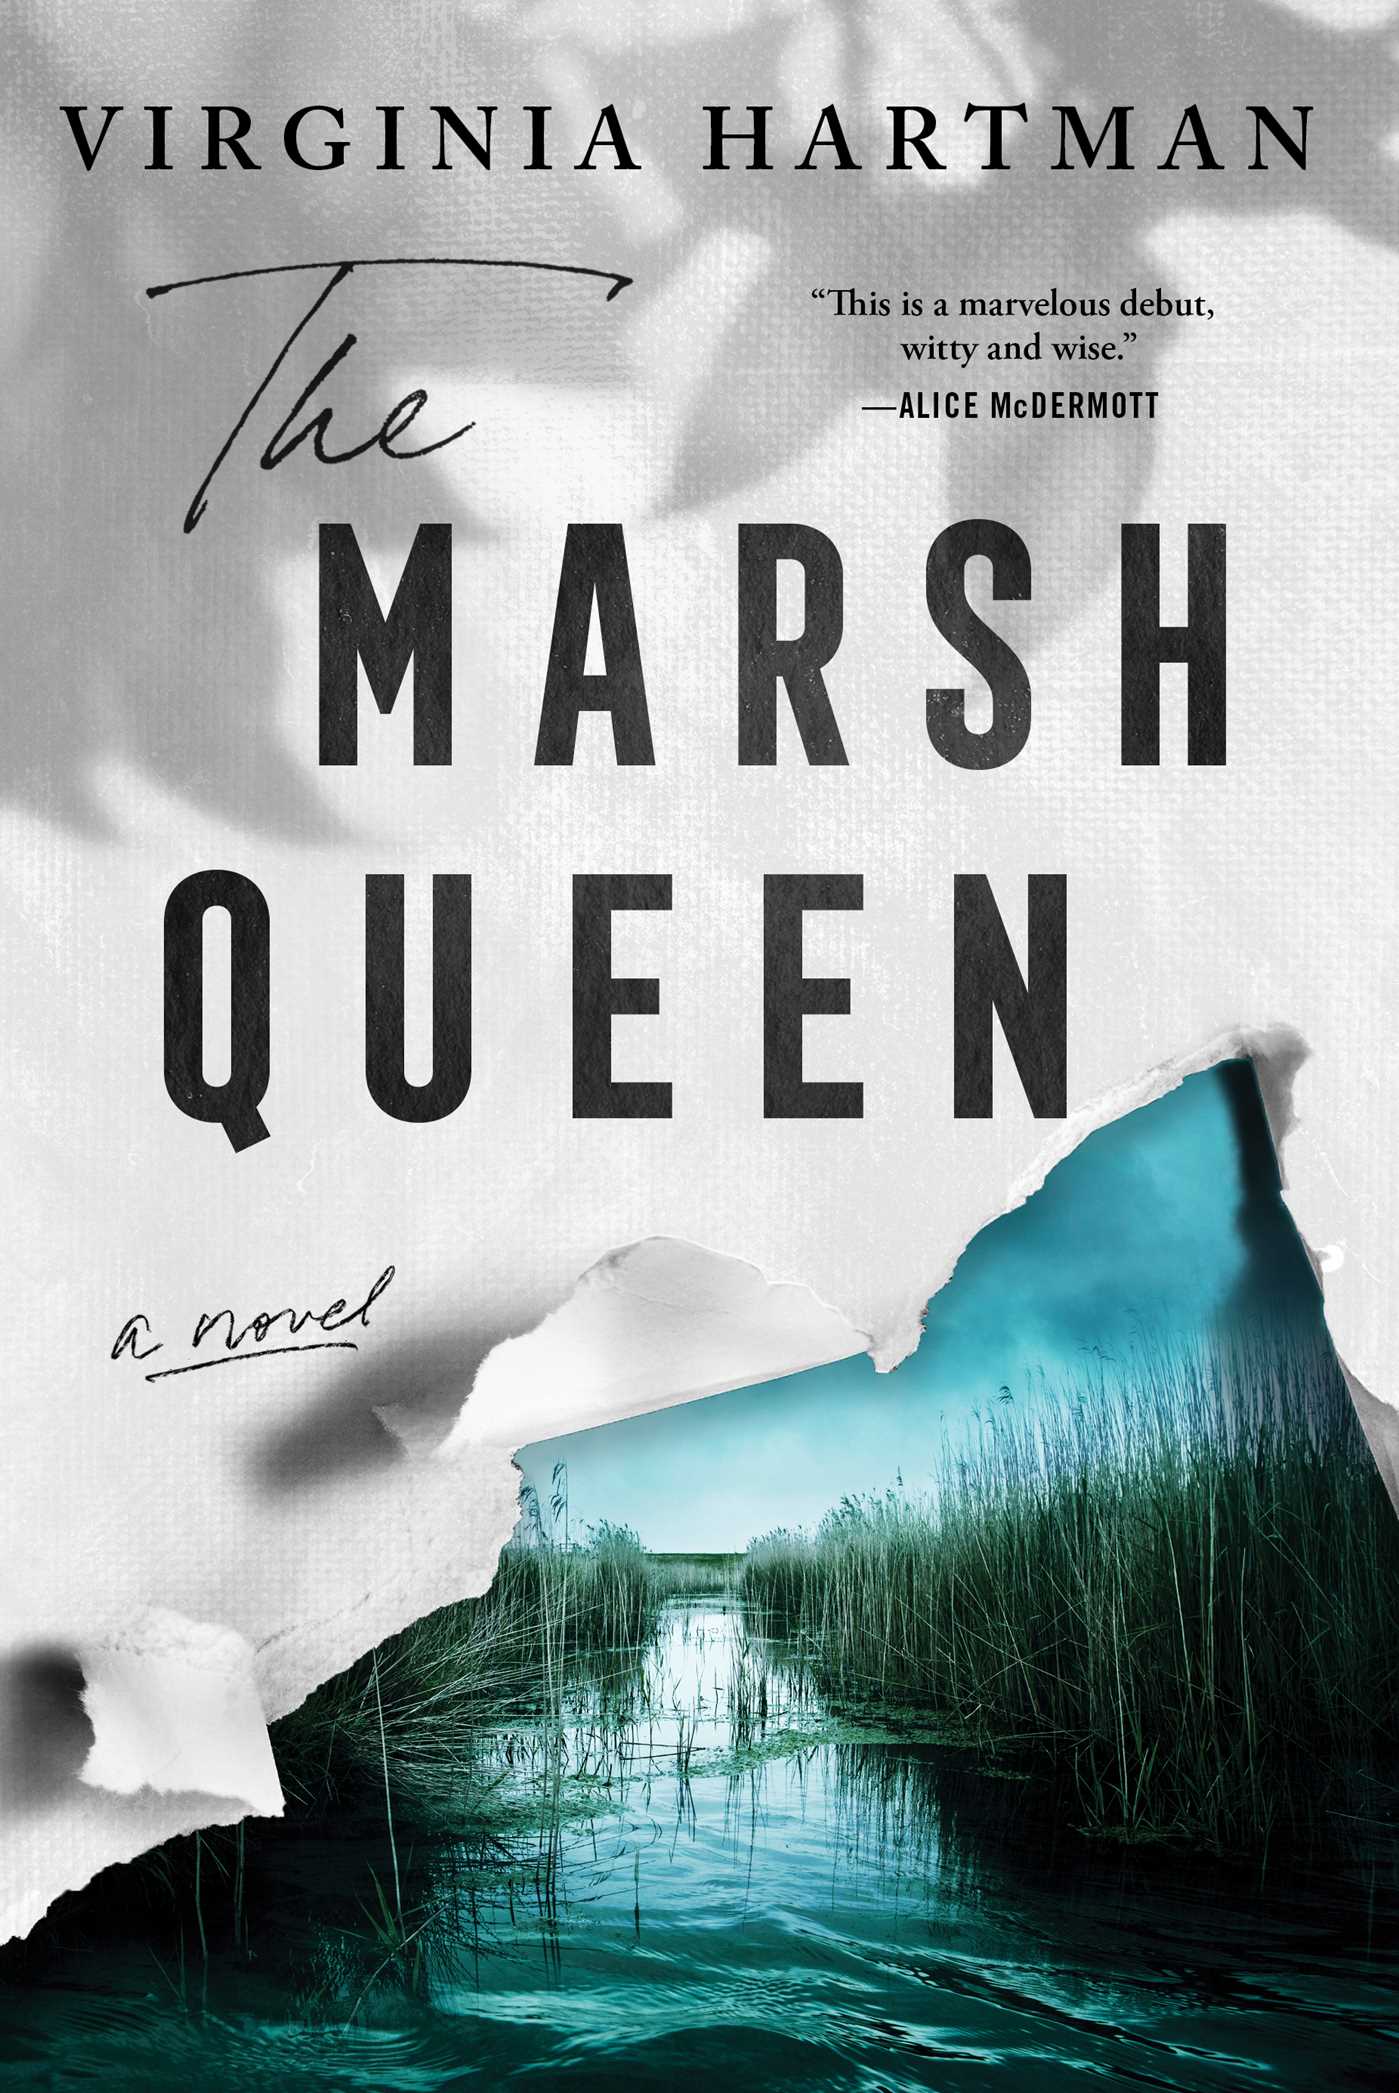 Image for "The Marsh Queen"